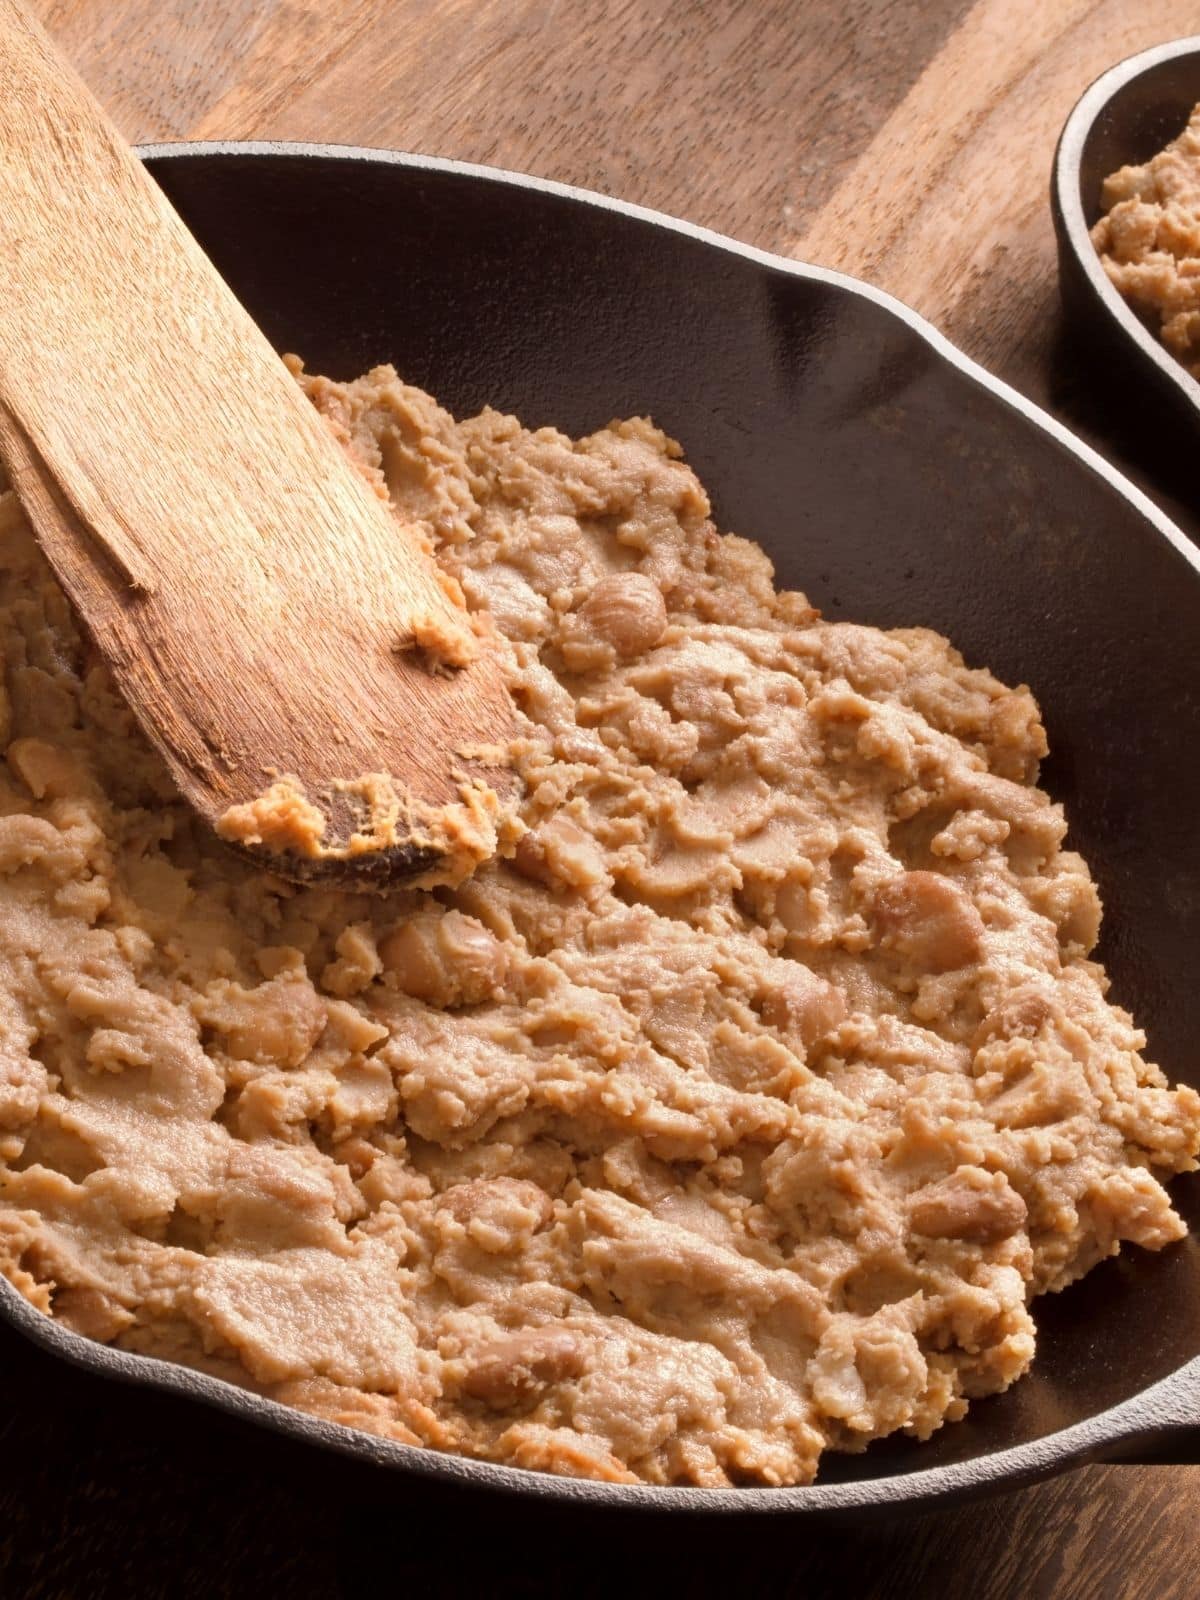 Refried beans are a traditional topping for nachos. Refried beans being cooked in a pan.